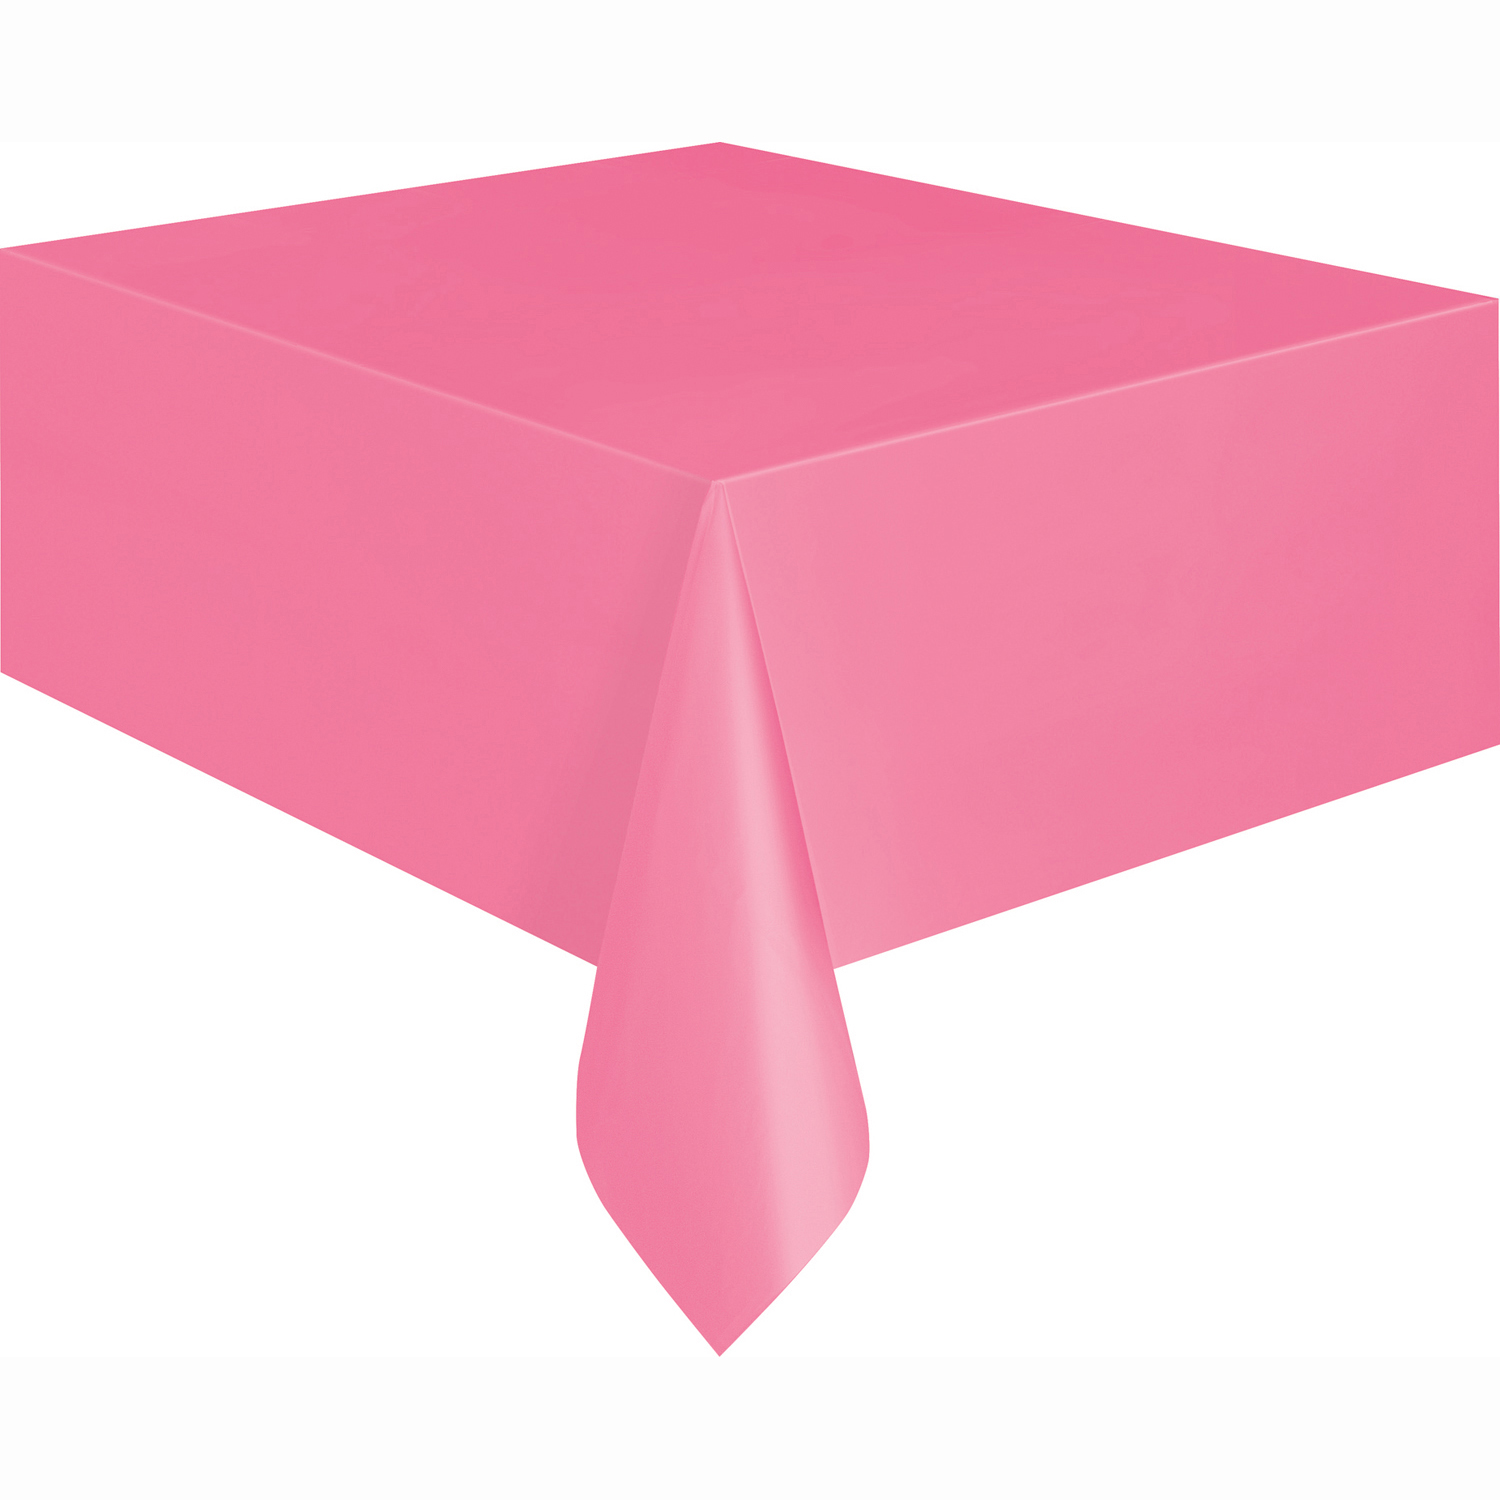 Hot Pink Plastic Party Tablecloth, 108 x 54in - image 3 of 4